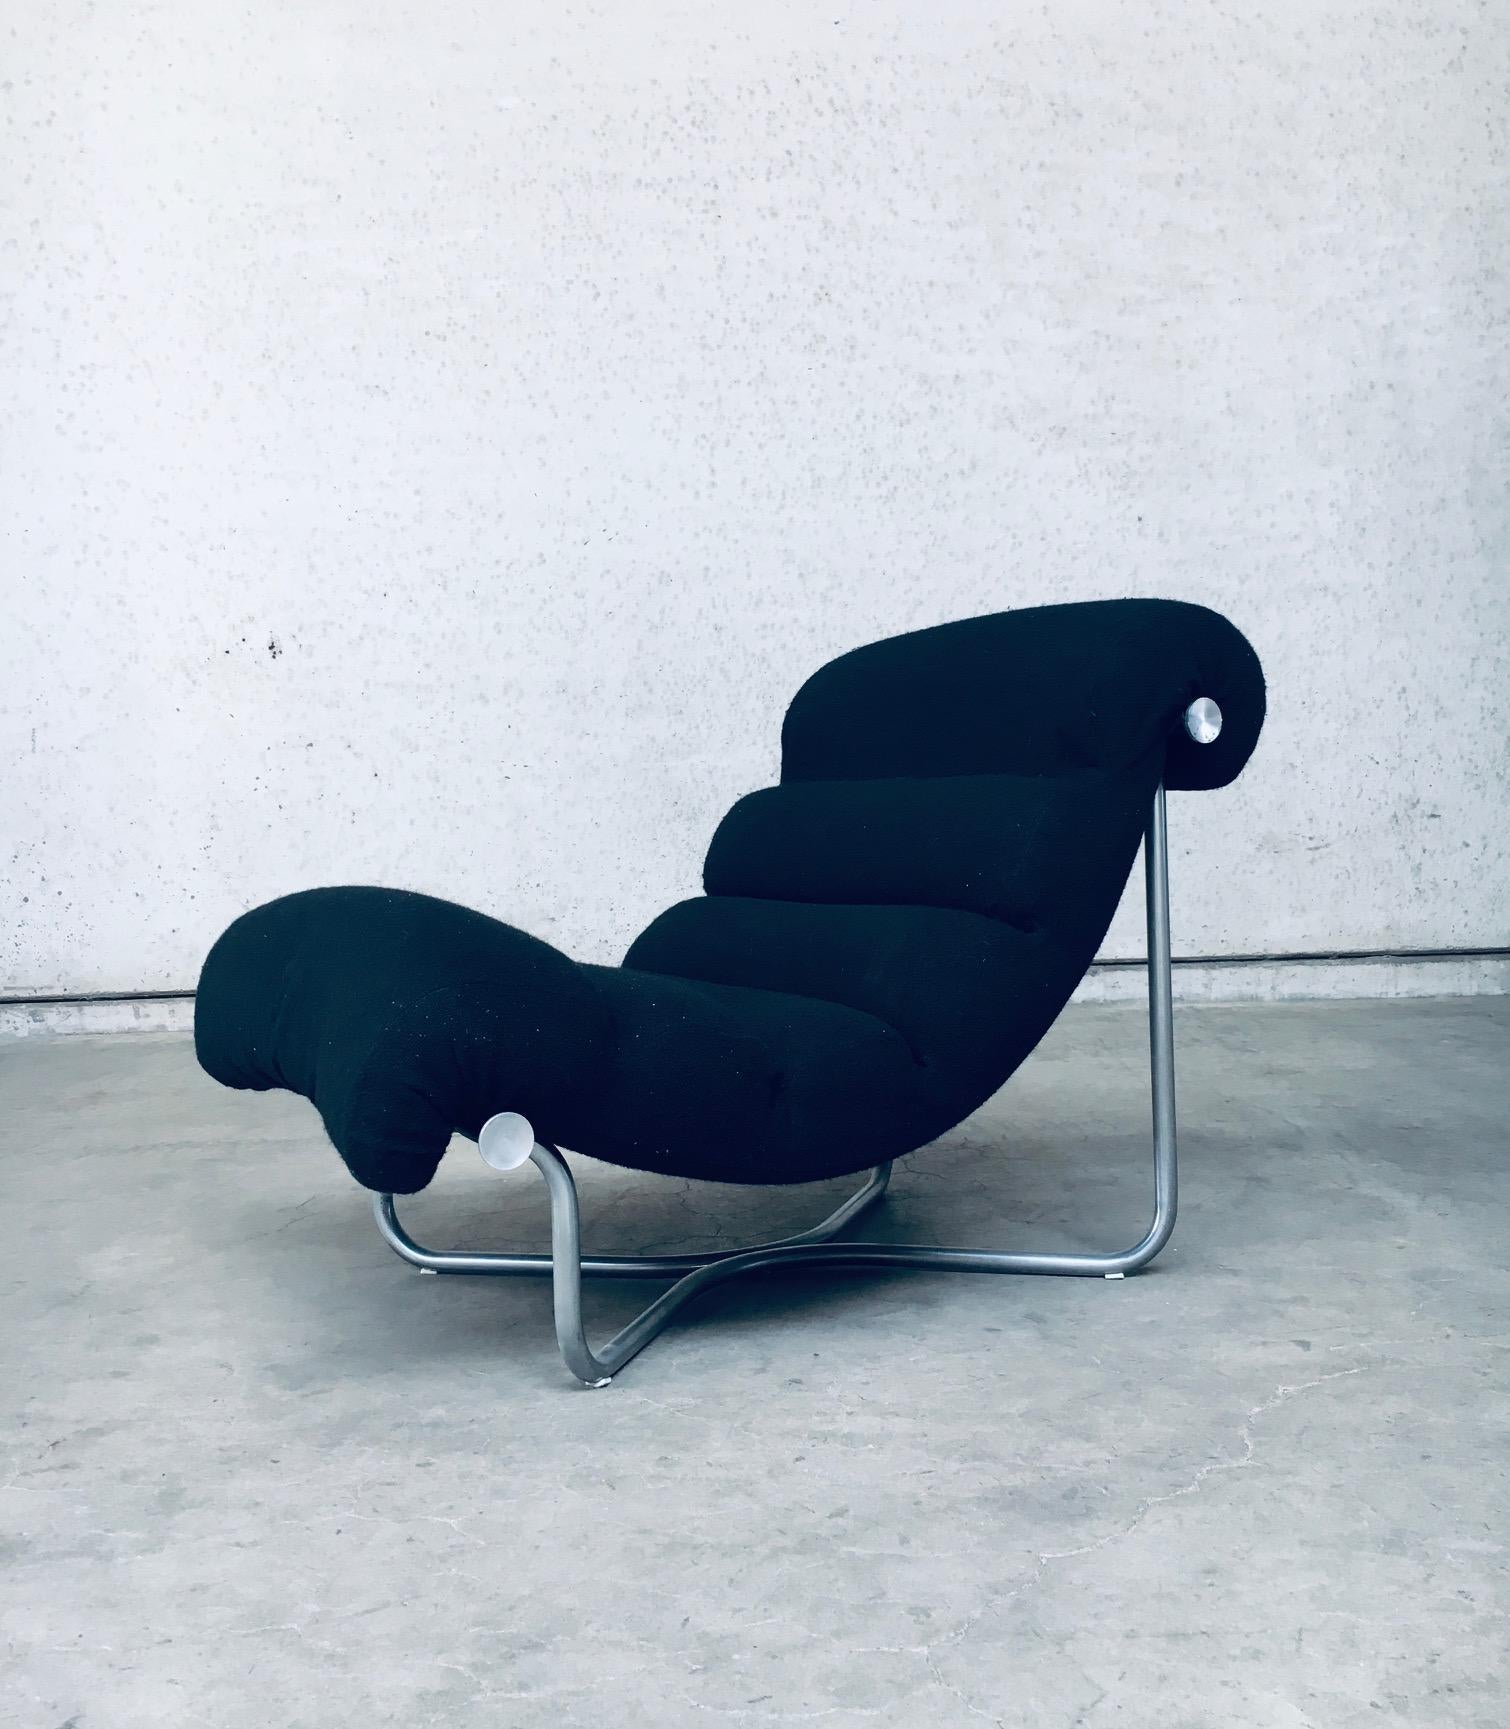 Mid-20th Century GLASGOW Lounge Chair & Ottoman by Georges Van Rijck for Beaufort, Belgium 1960's